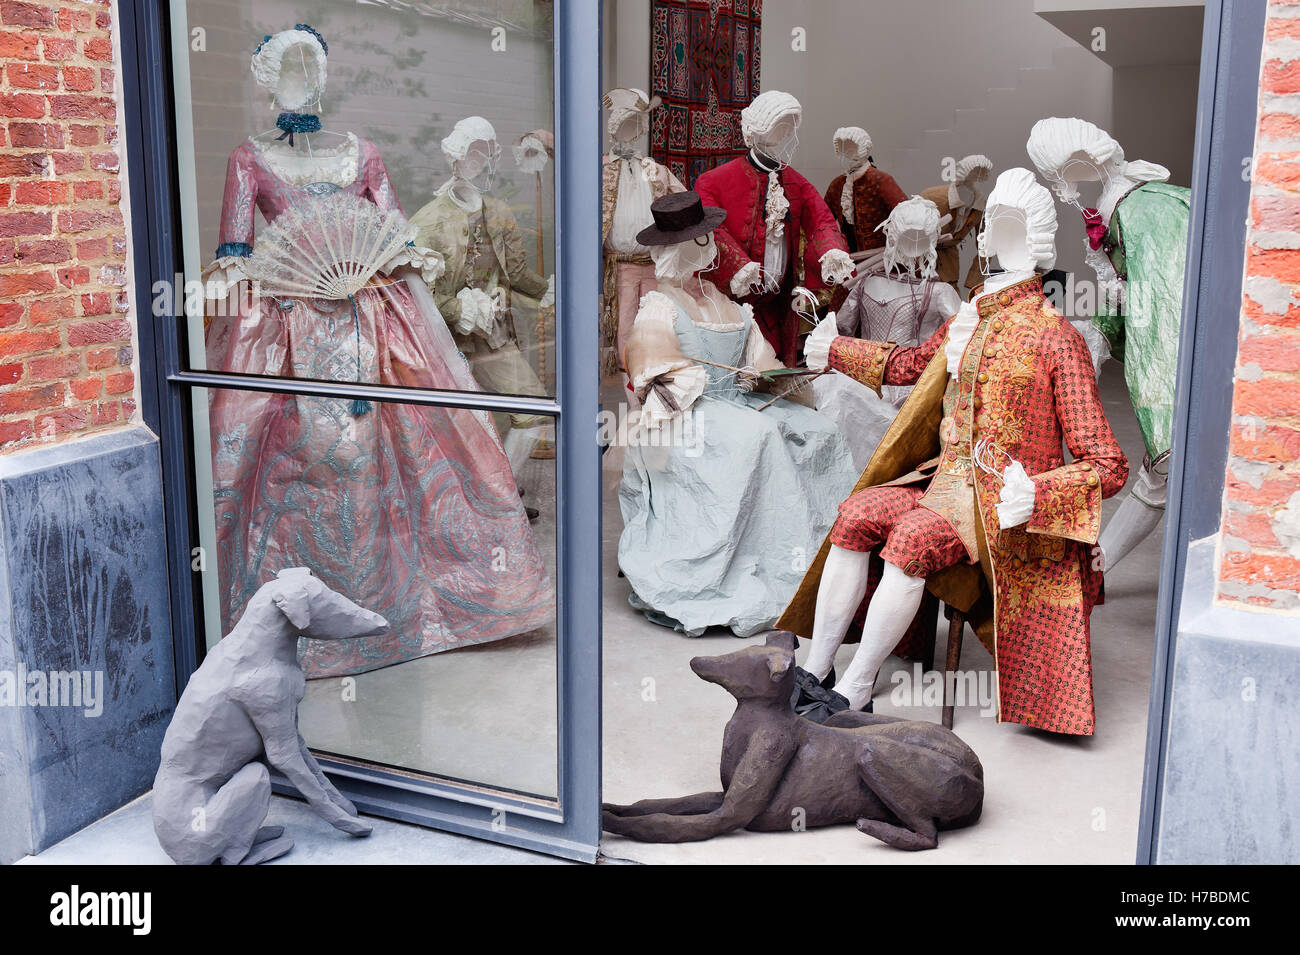 Room of wire models in historical replica paper garments at leisure, by Isabelle de Borchgrave Stock Photo